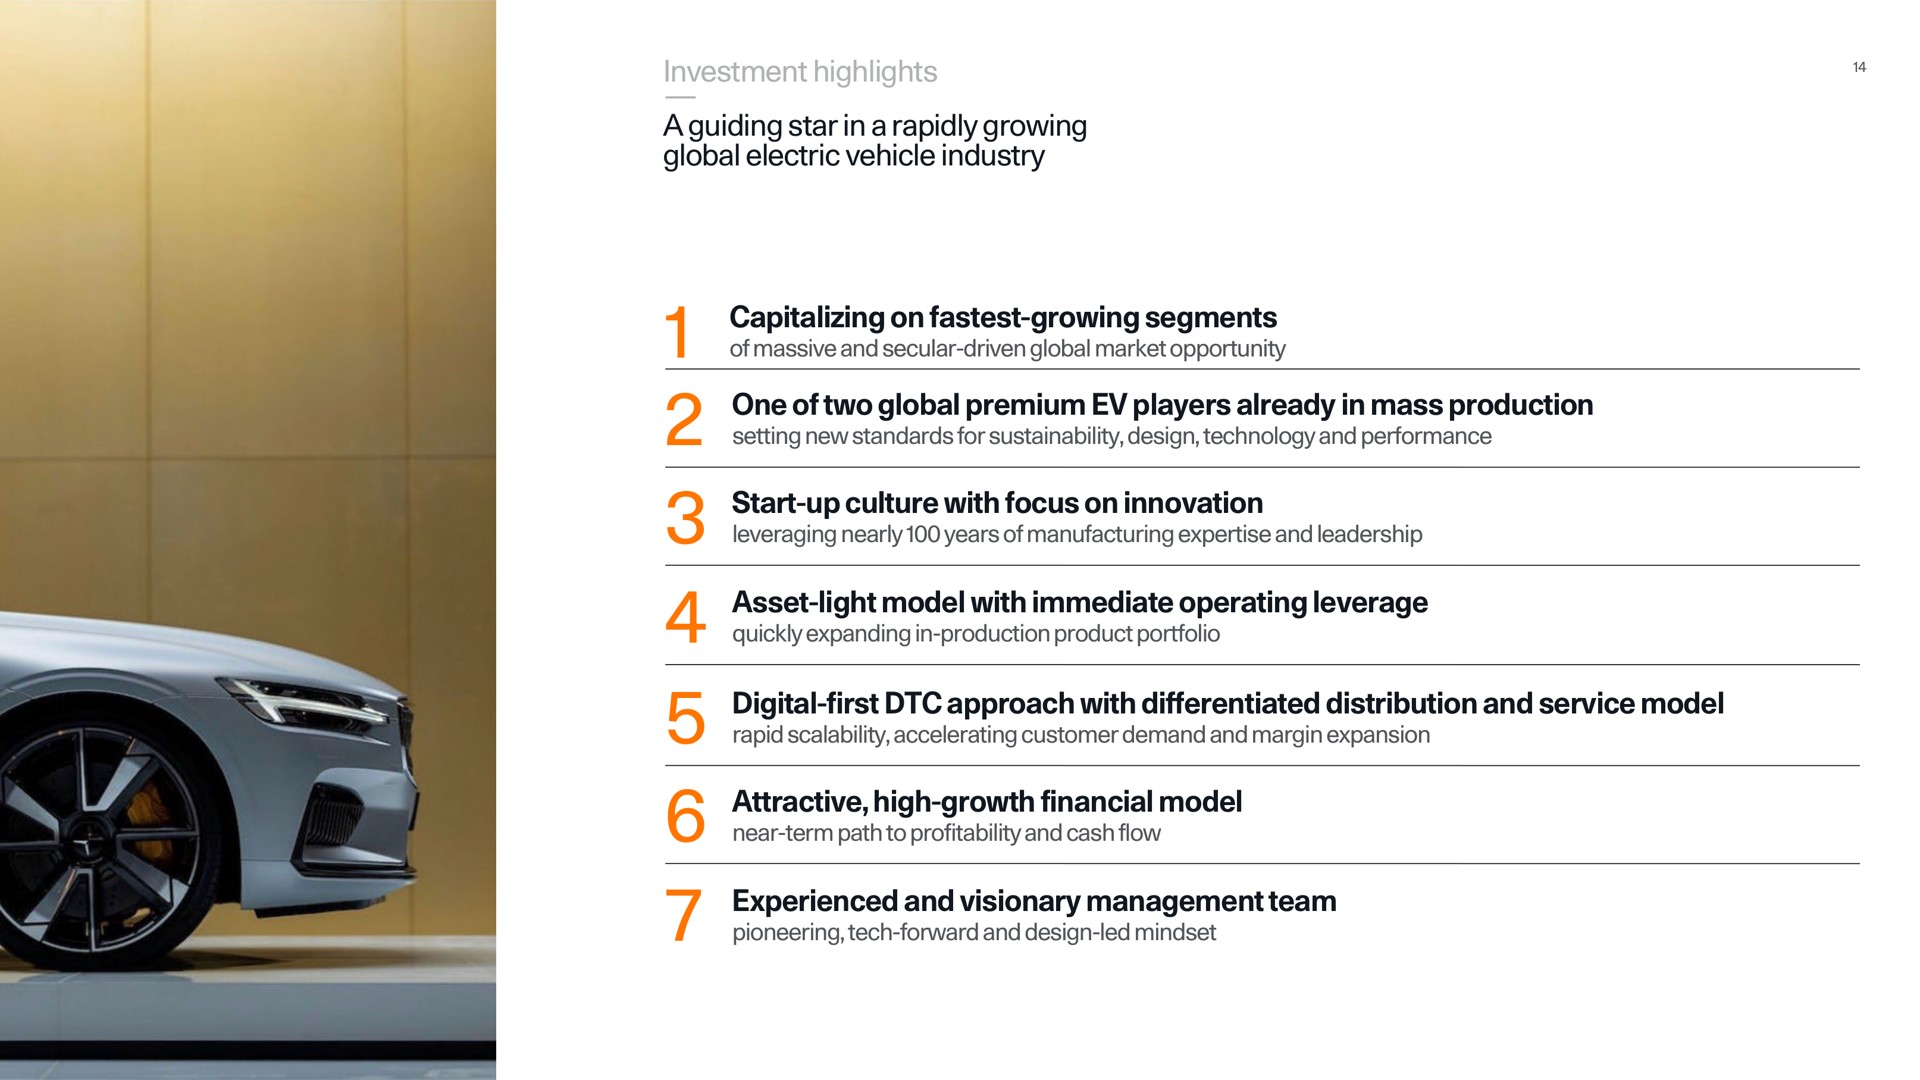 investment highlights a guiding star in a rapidly growing global electric vehicle industry capitalizing on growing segments one of two global premium players already in mass production start up culture with focus on innovation asset light model with immediate operating leverage digital first approach with differentiated distribution and service model attractive high growth financial model experienced and visionary management team | Polestar